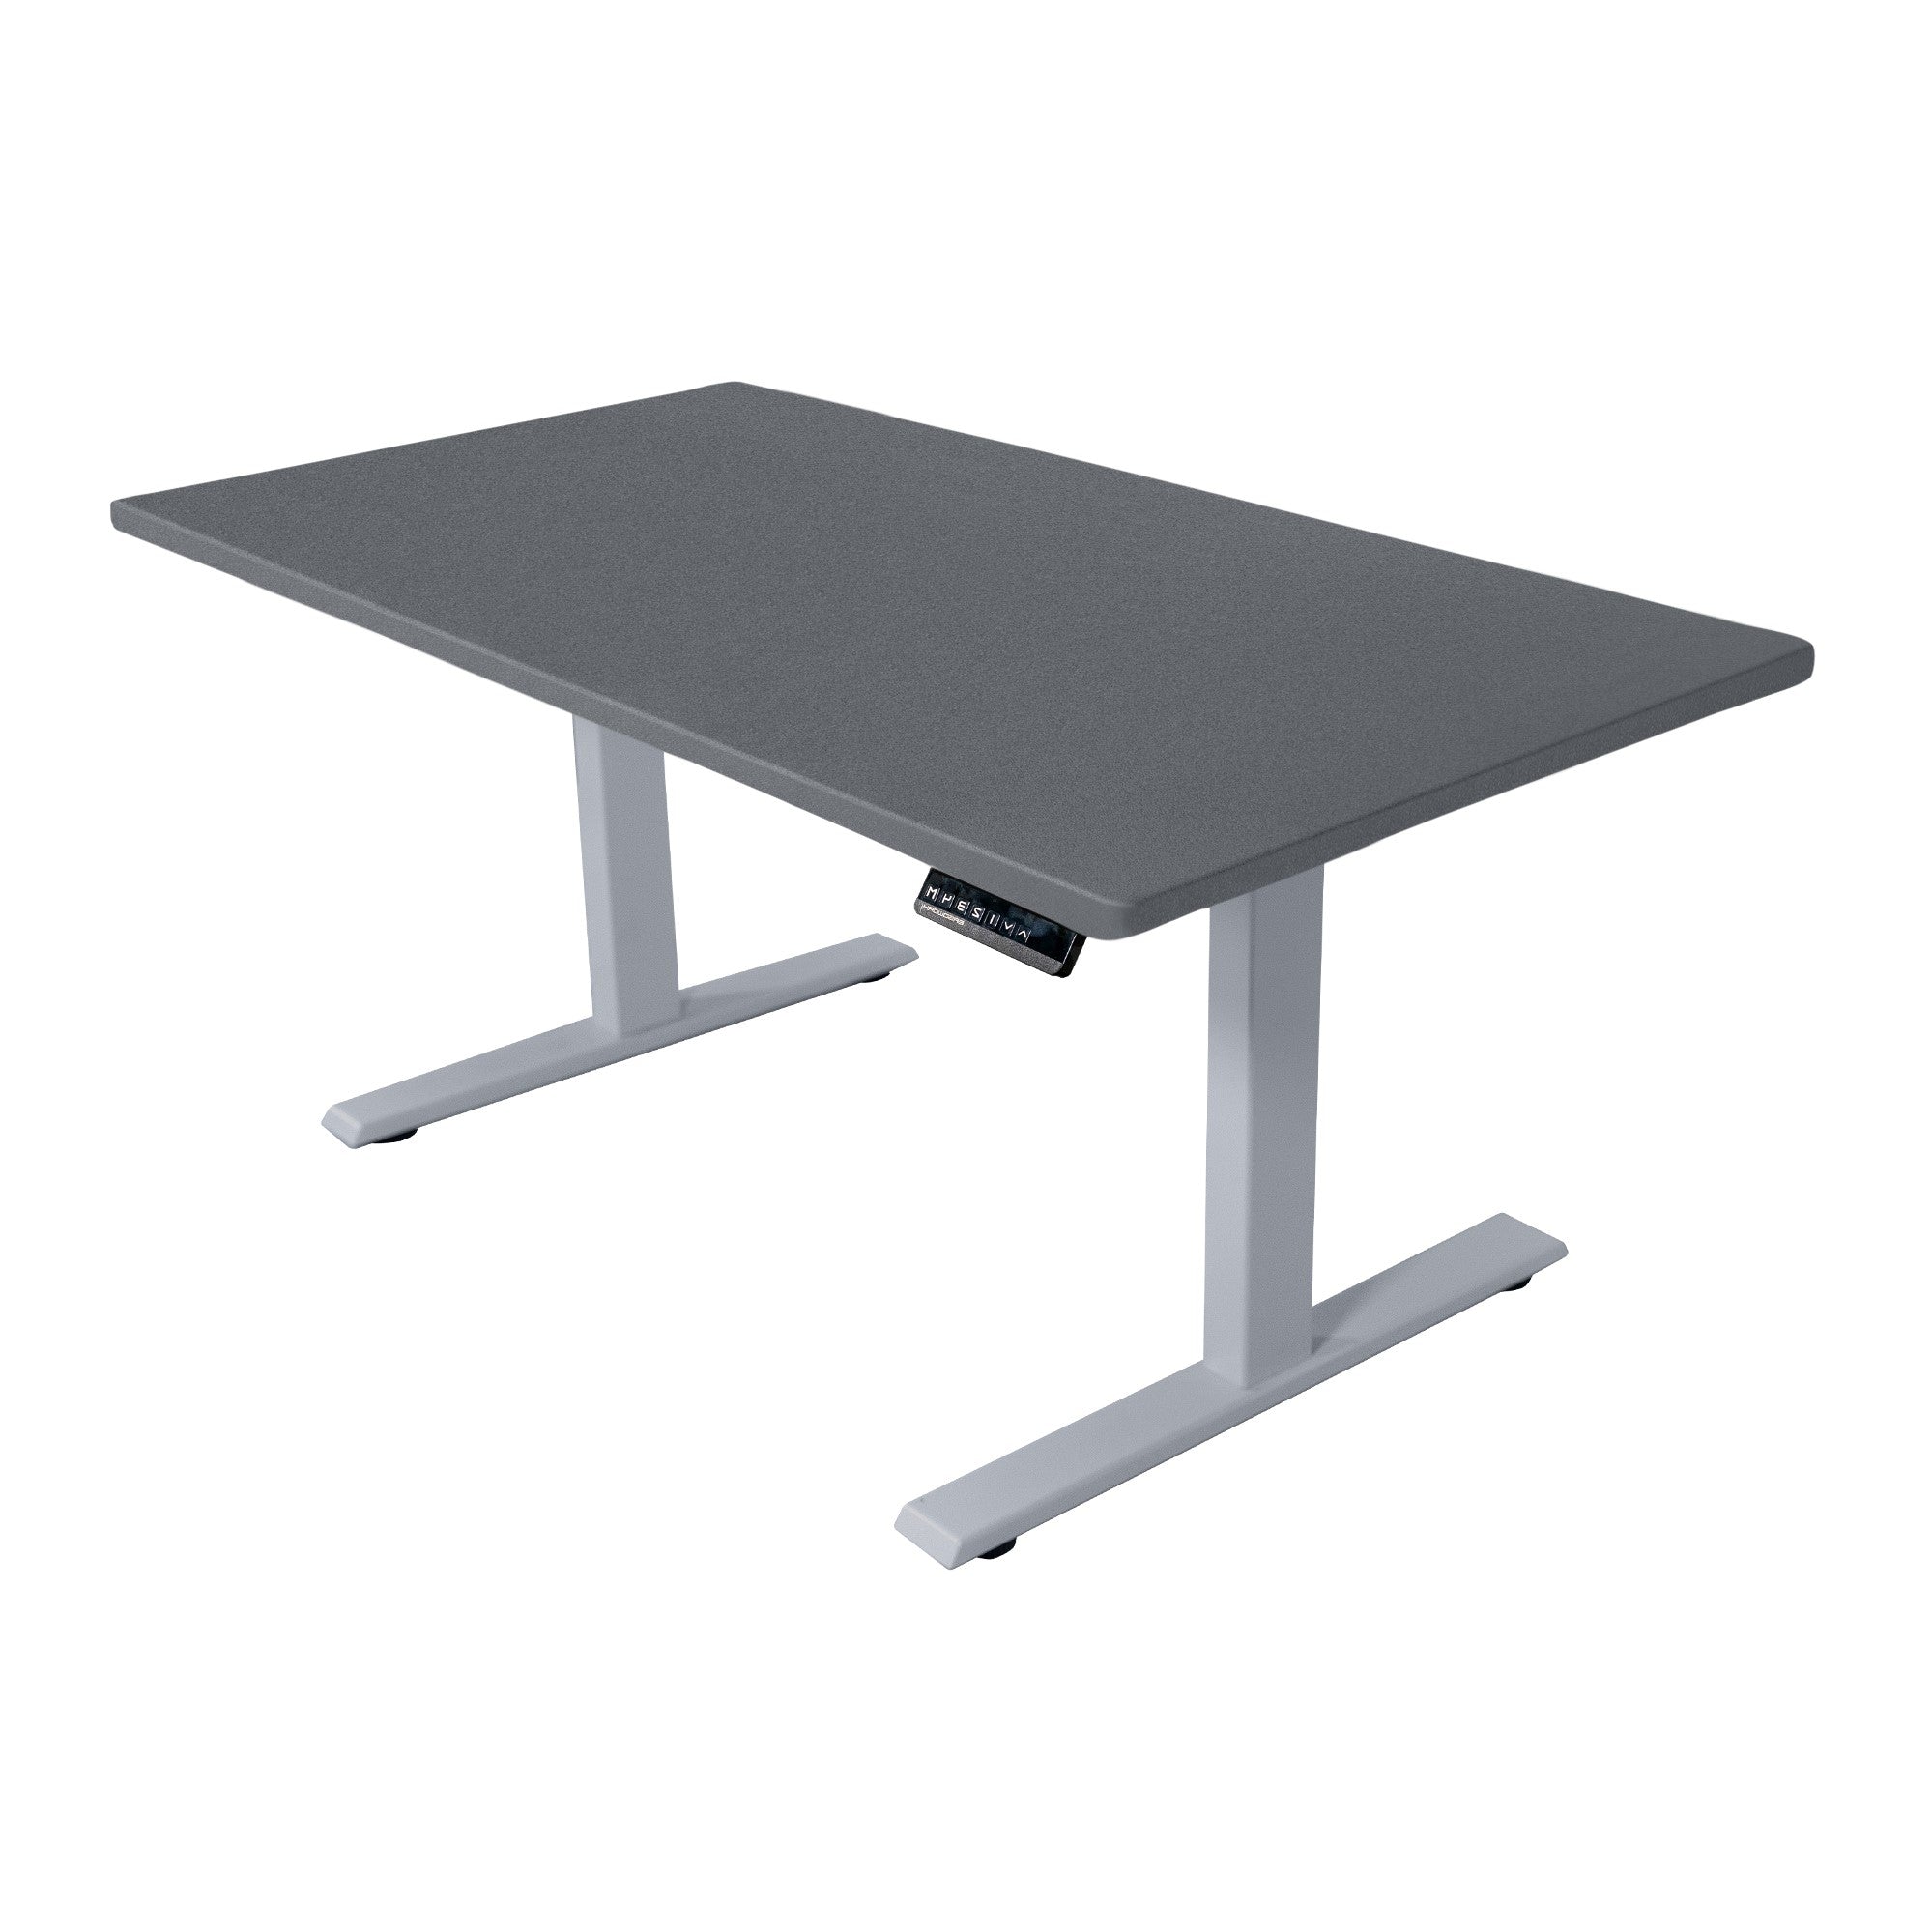 Electric Height Adjustable Desk with MFC Tabletop - EW-0226F1V2